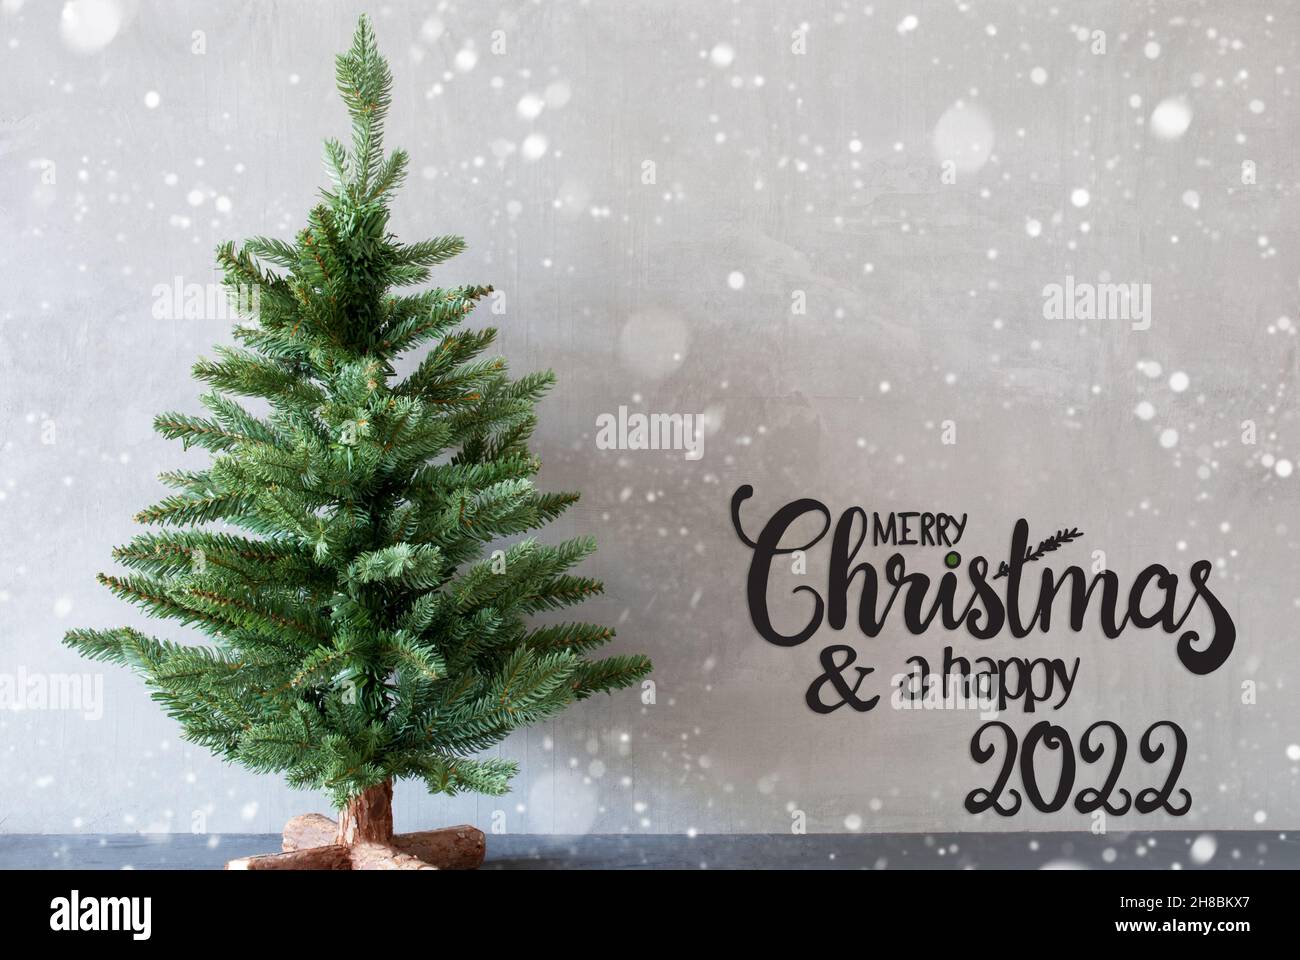 Christmas Tree, Merry Christmas And A Happy 2022, Gray Background, Snowflakes Stock Photo